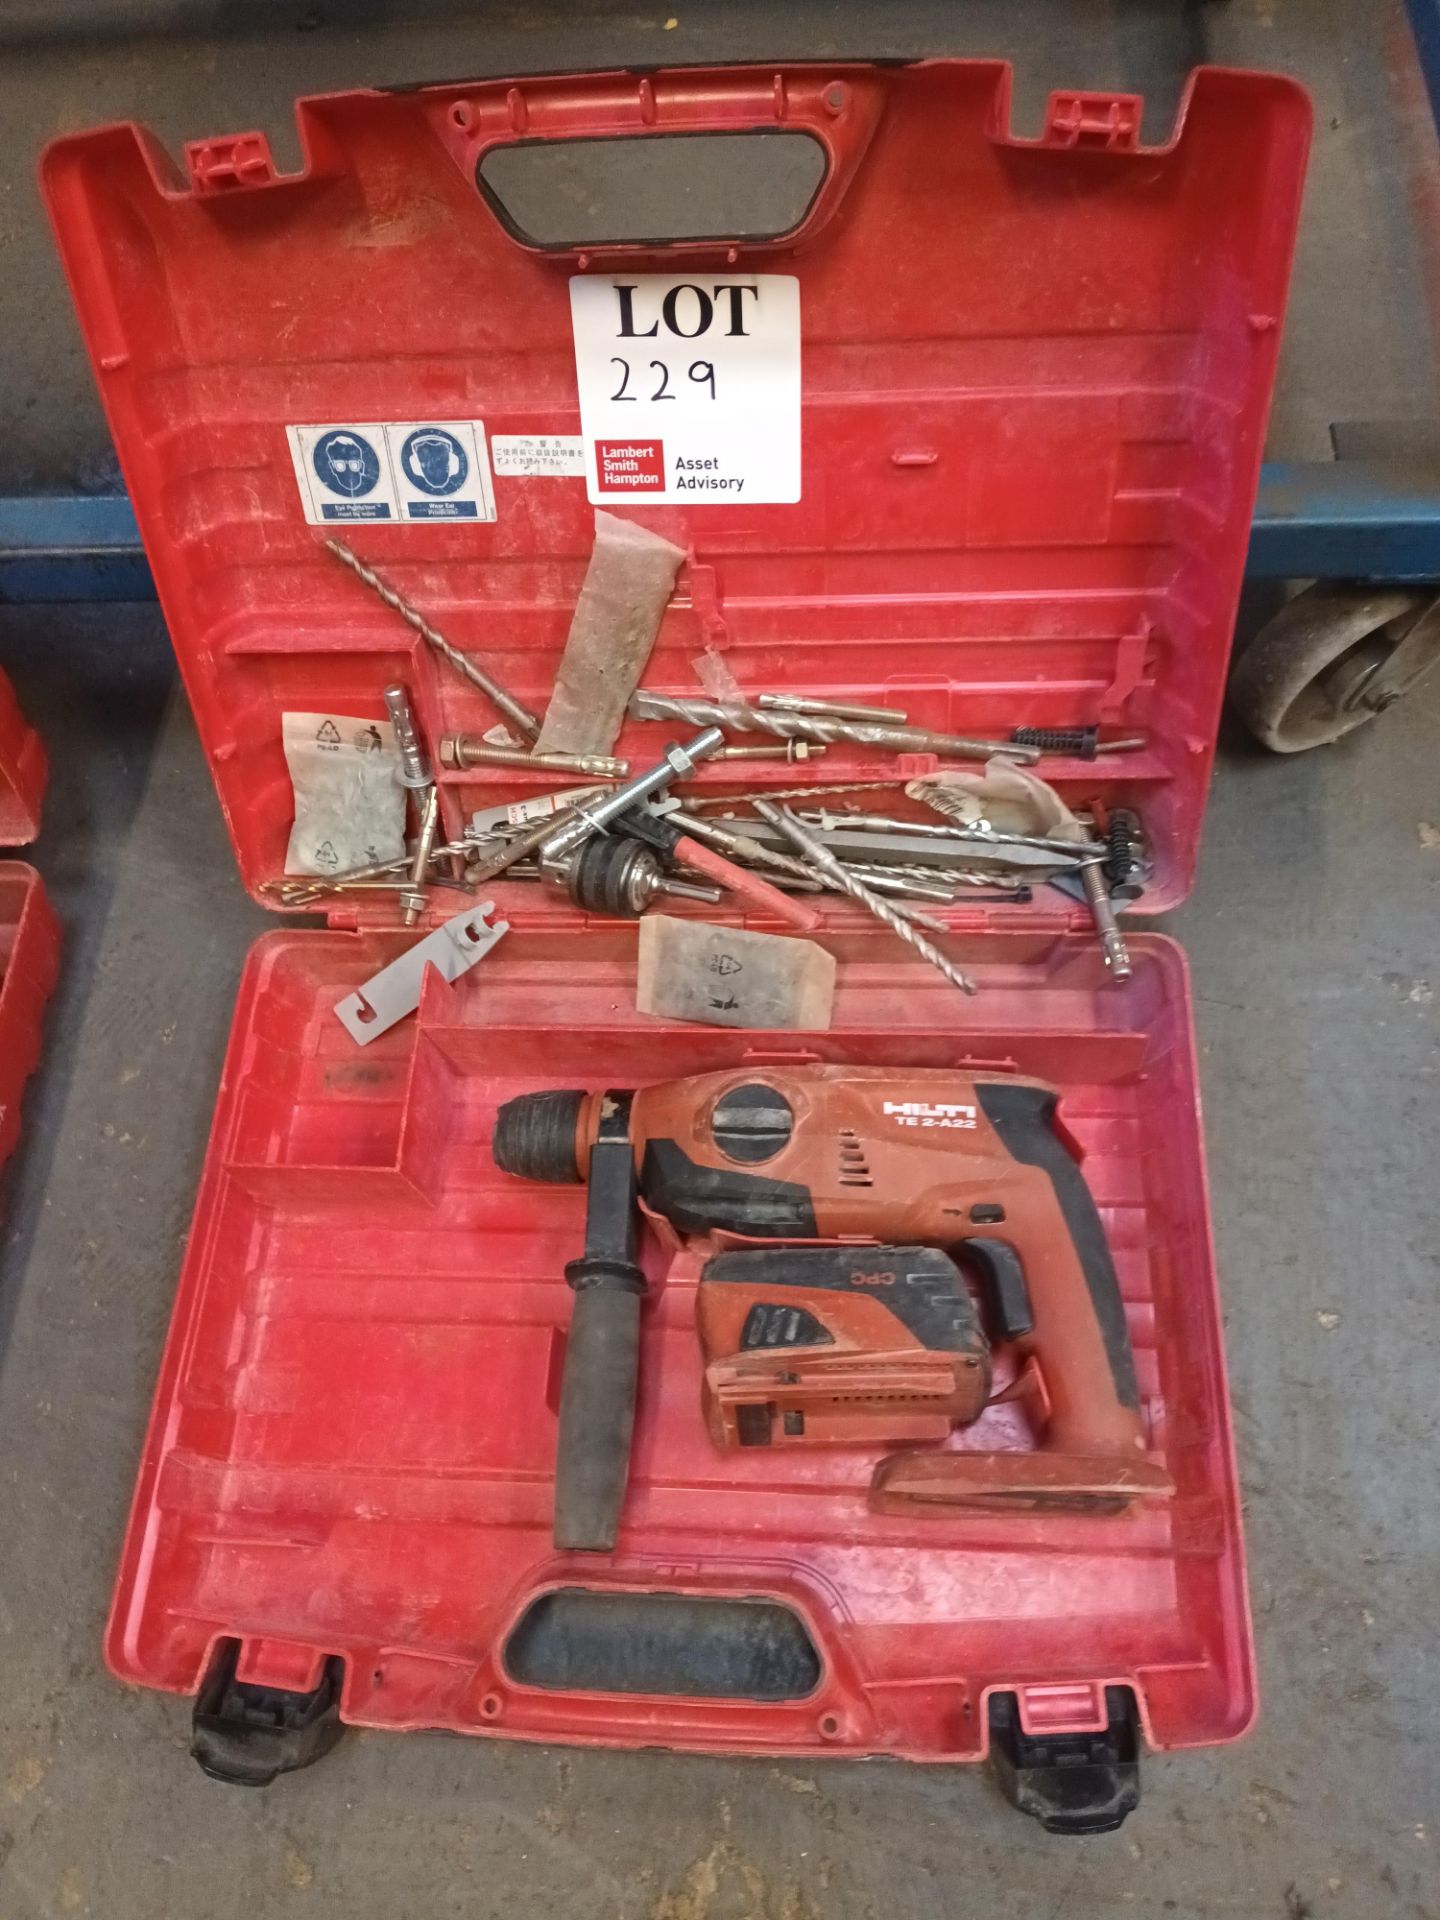 Hilti TE 2-A22 cordless rotary hammer drill with battery and carry case